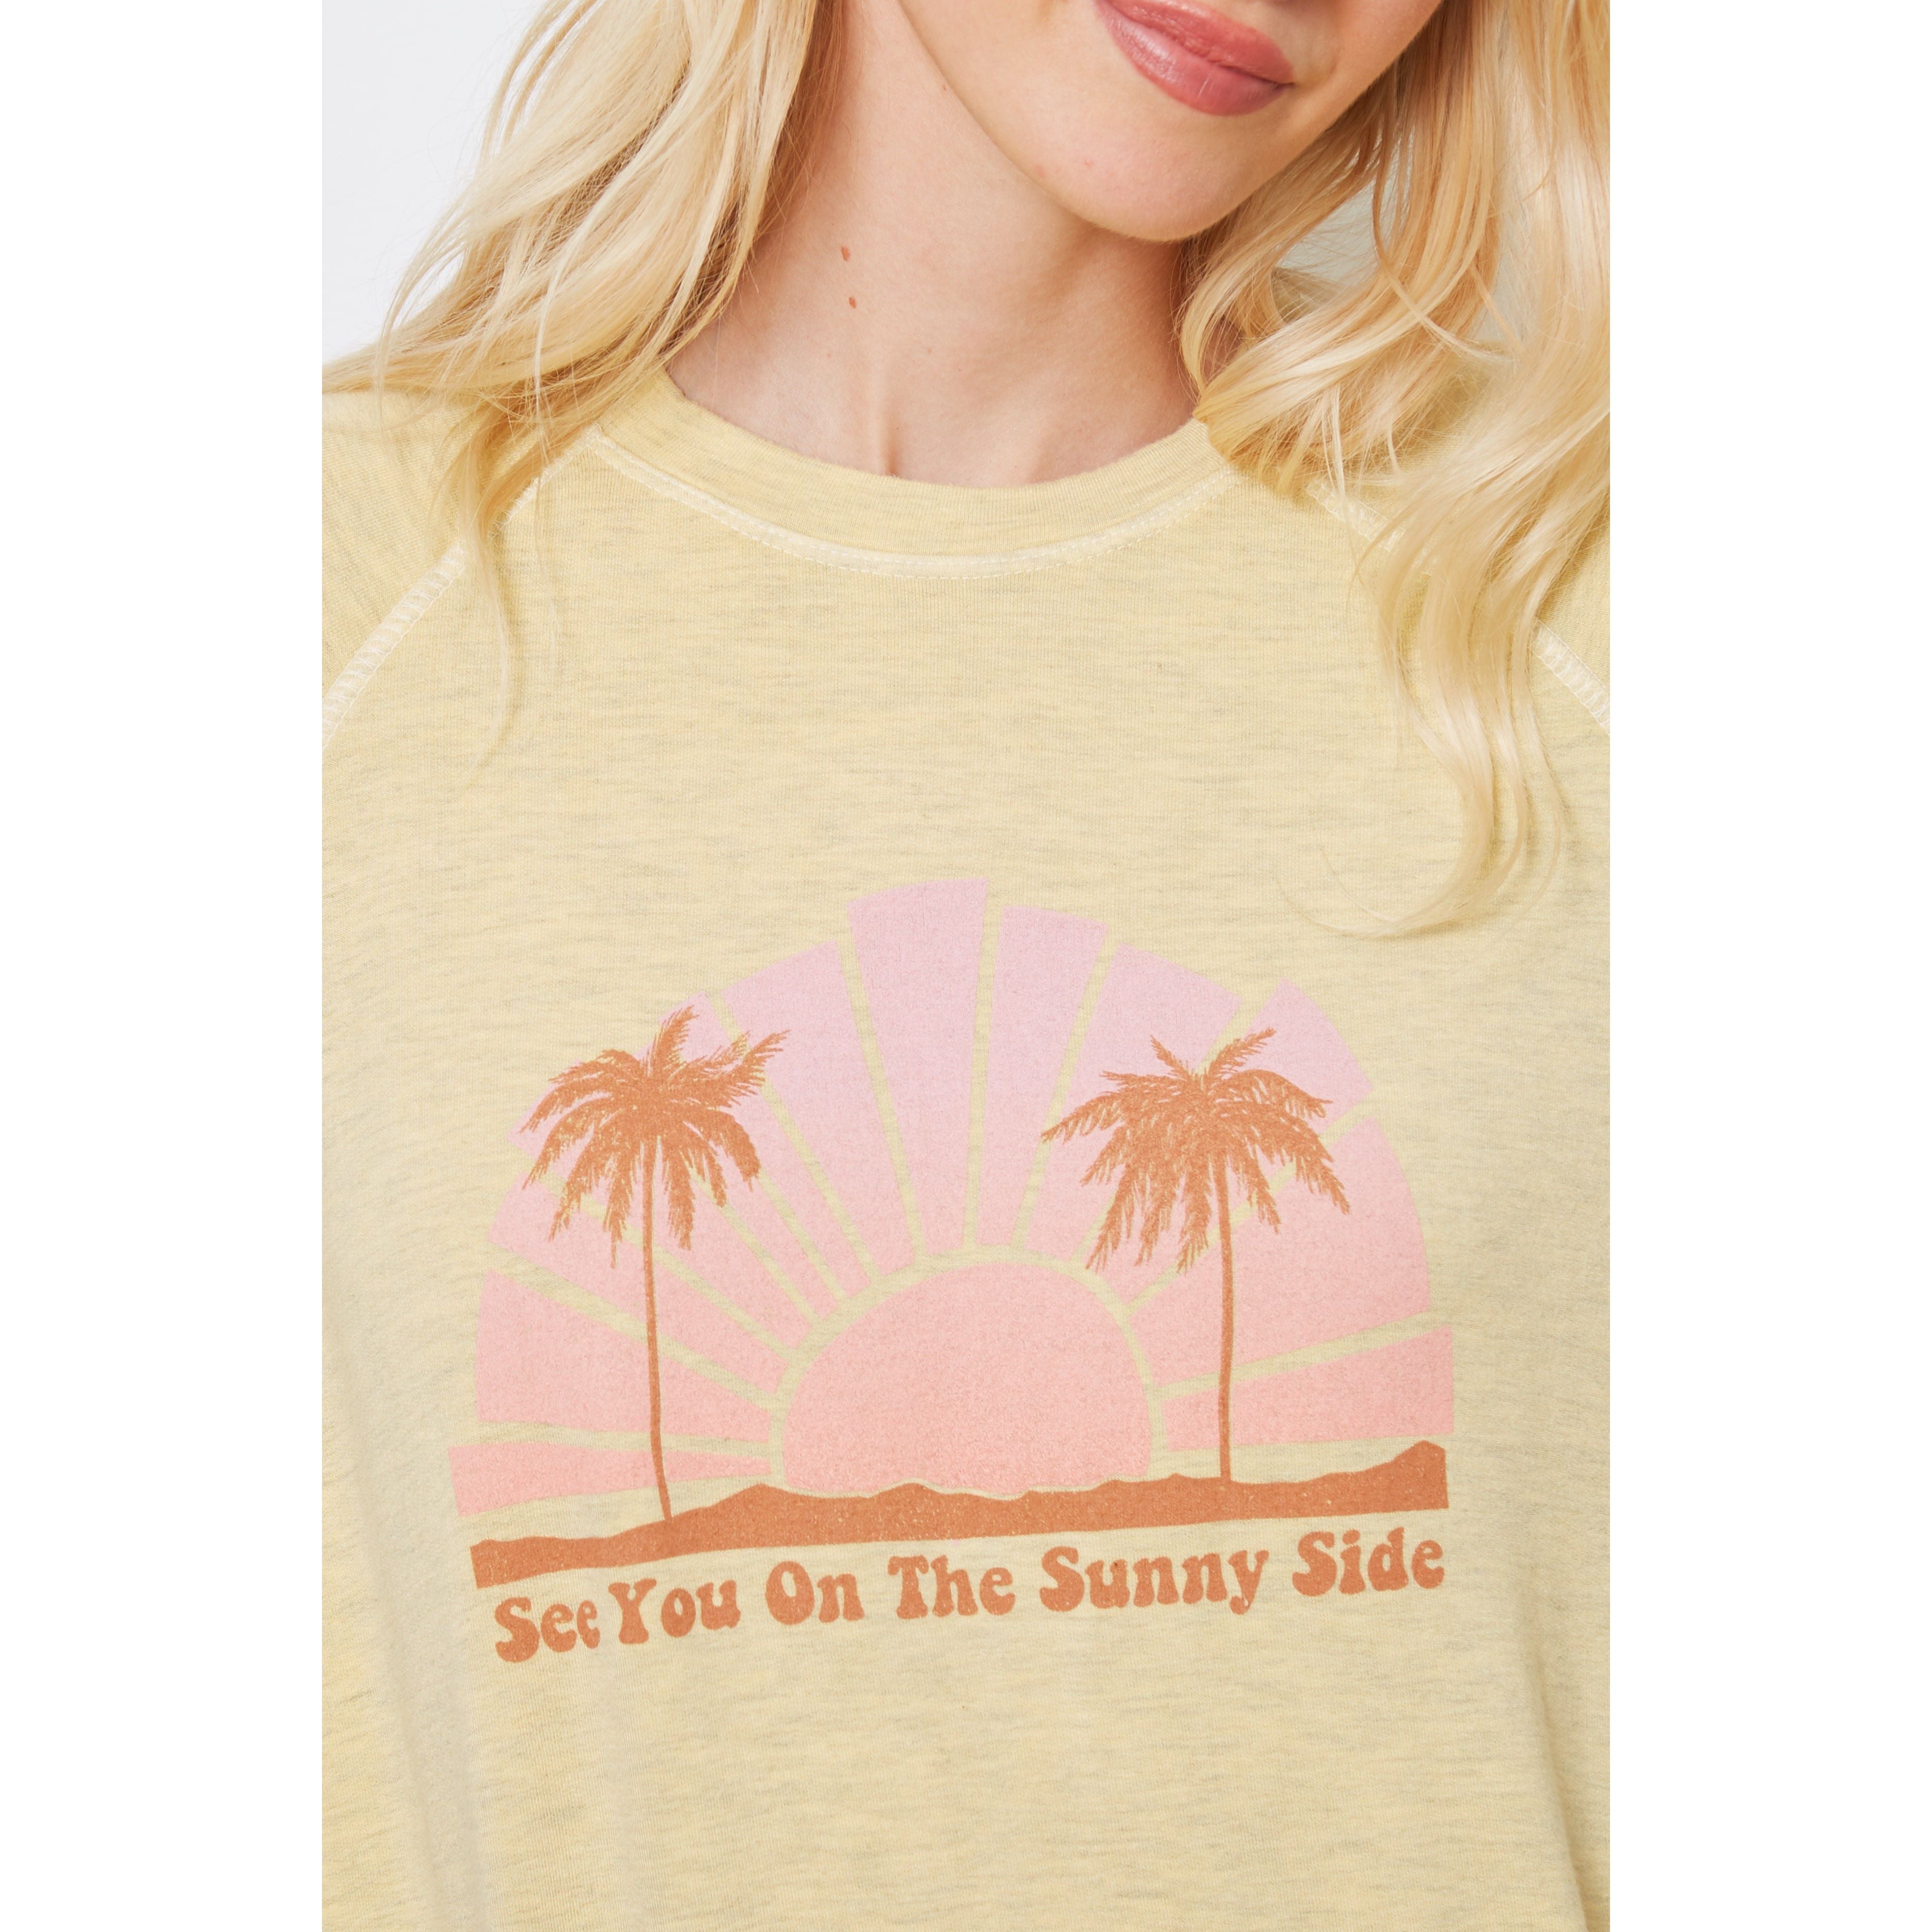 Good Hyouman - See You On the Sunny Side Smith Sweatshirt in Pale Banana